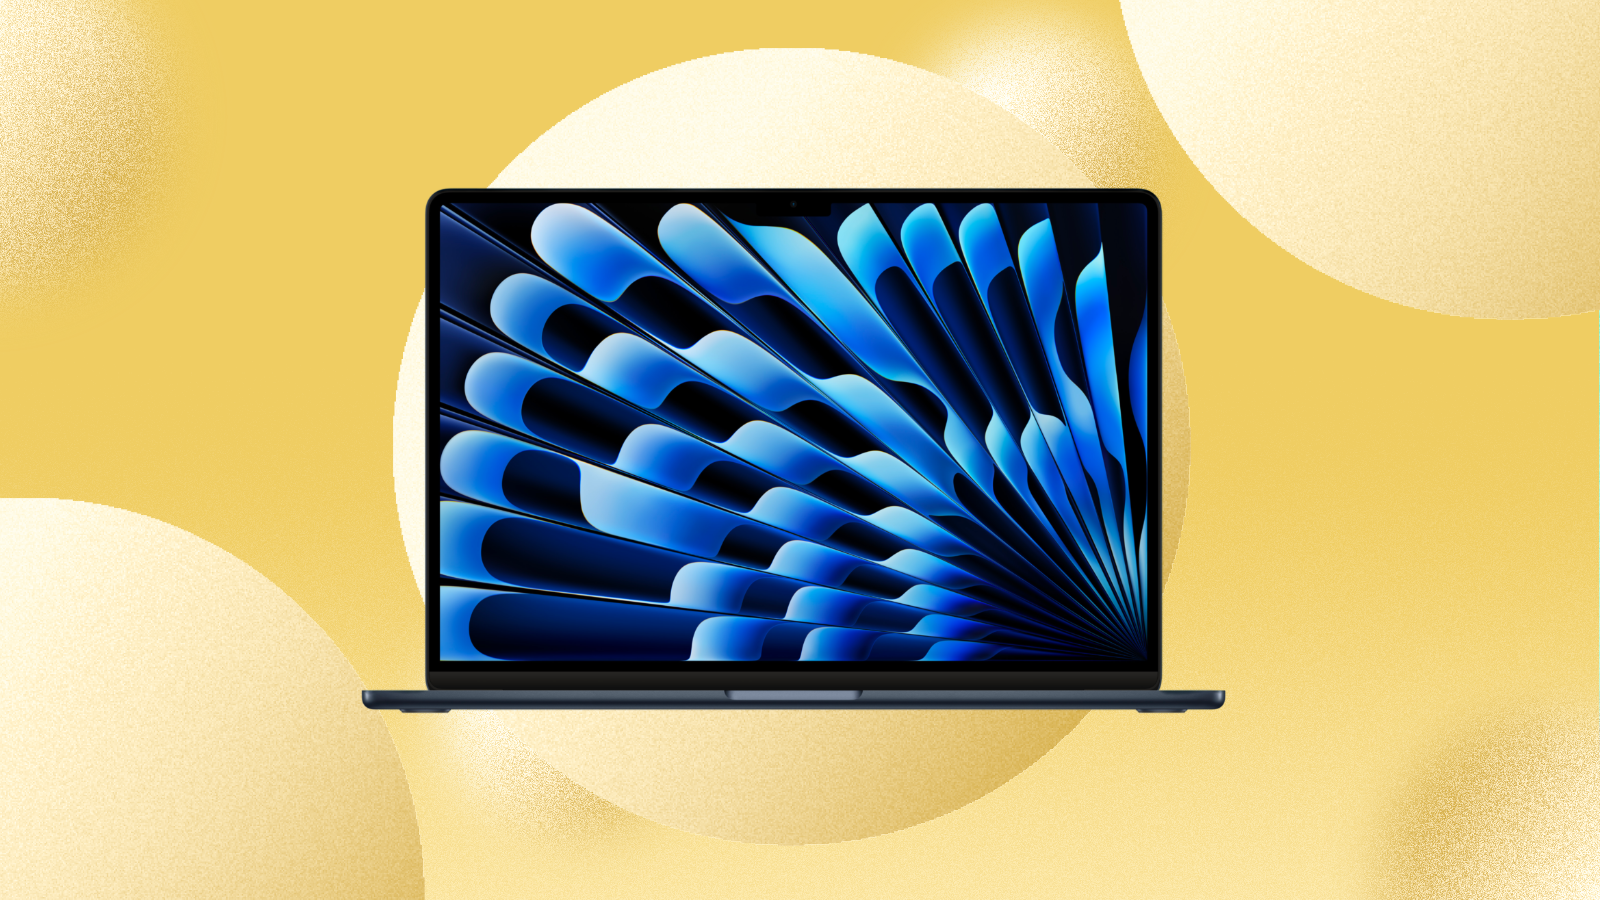 Save $100 on Apple's new 2021 MacBook Pro right now - CNET